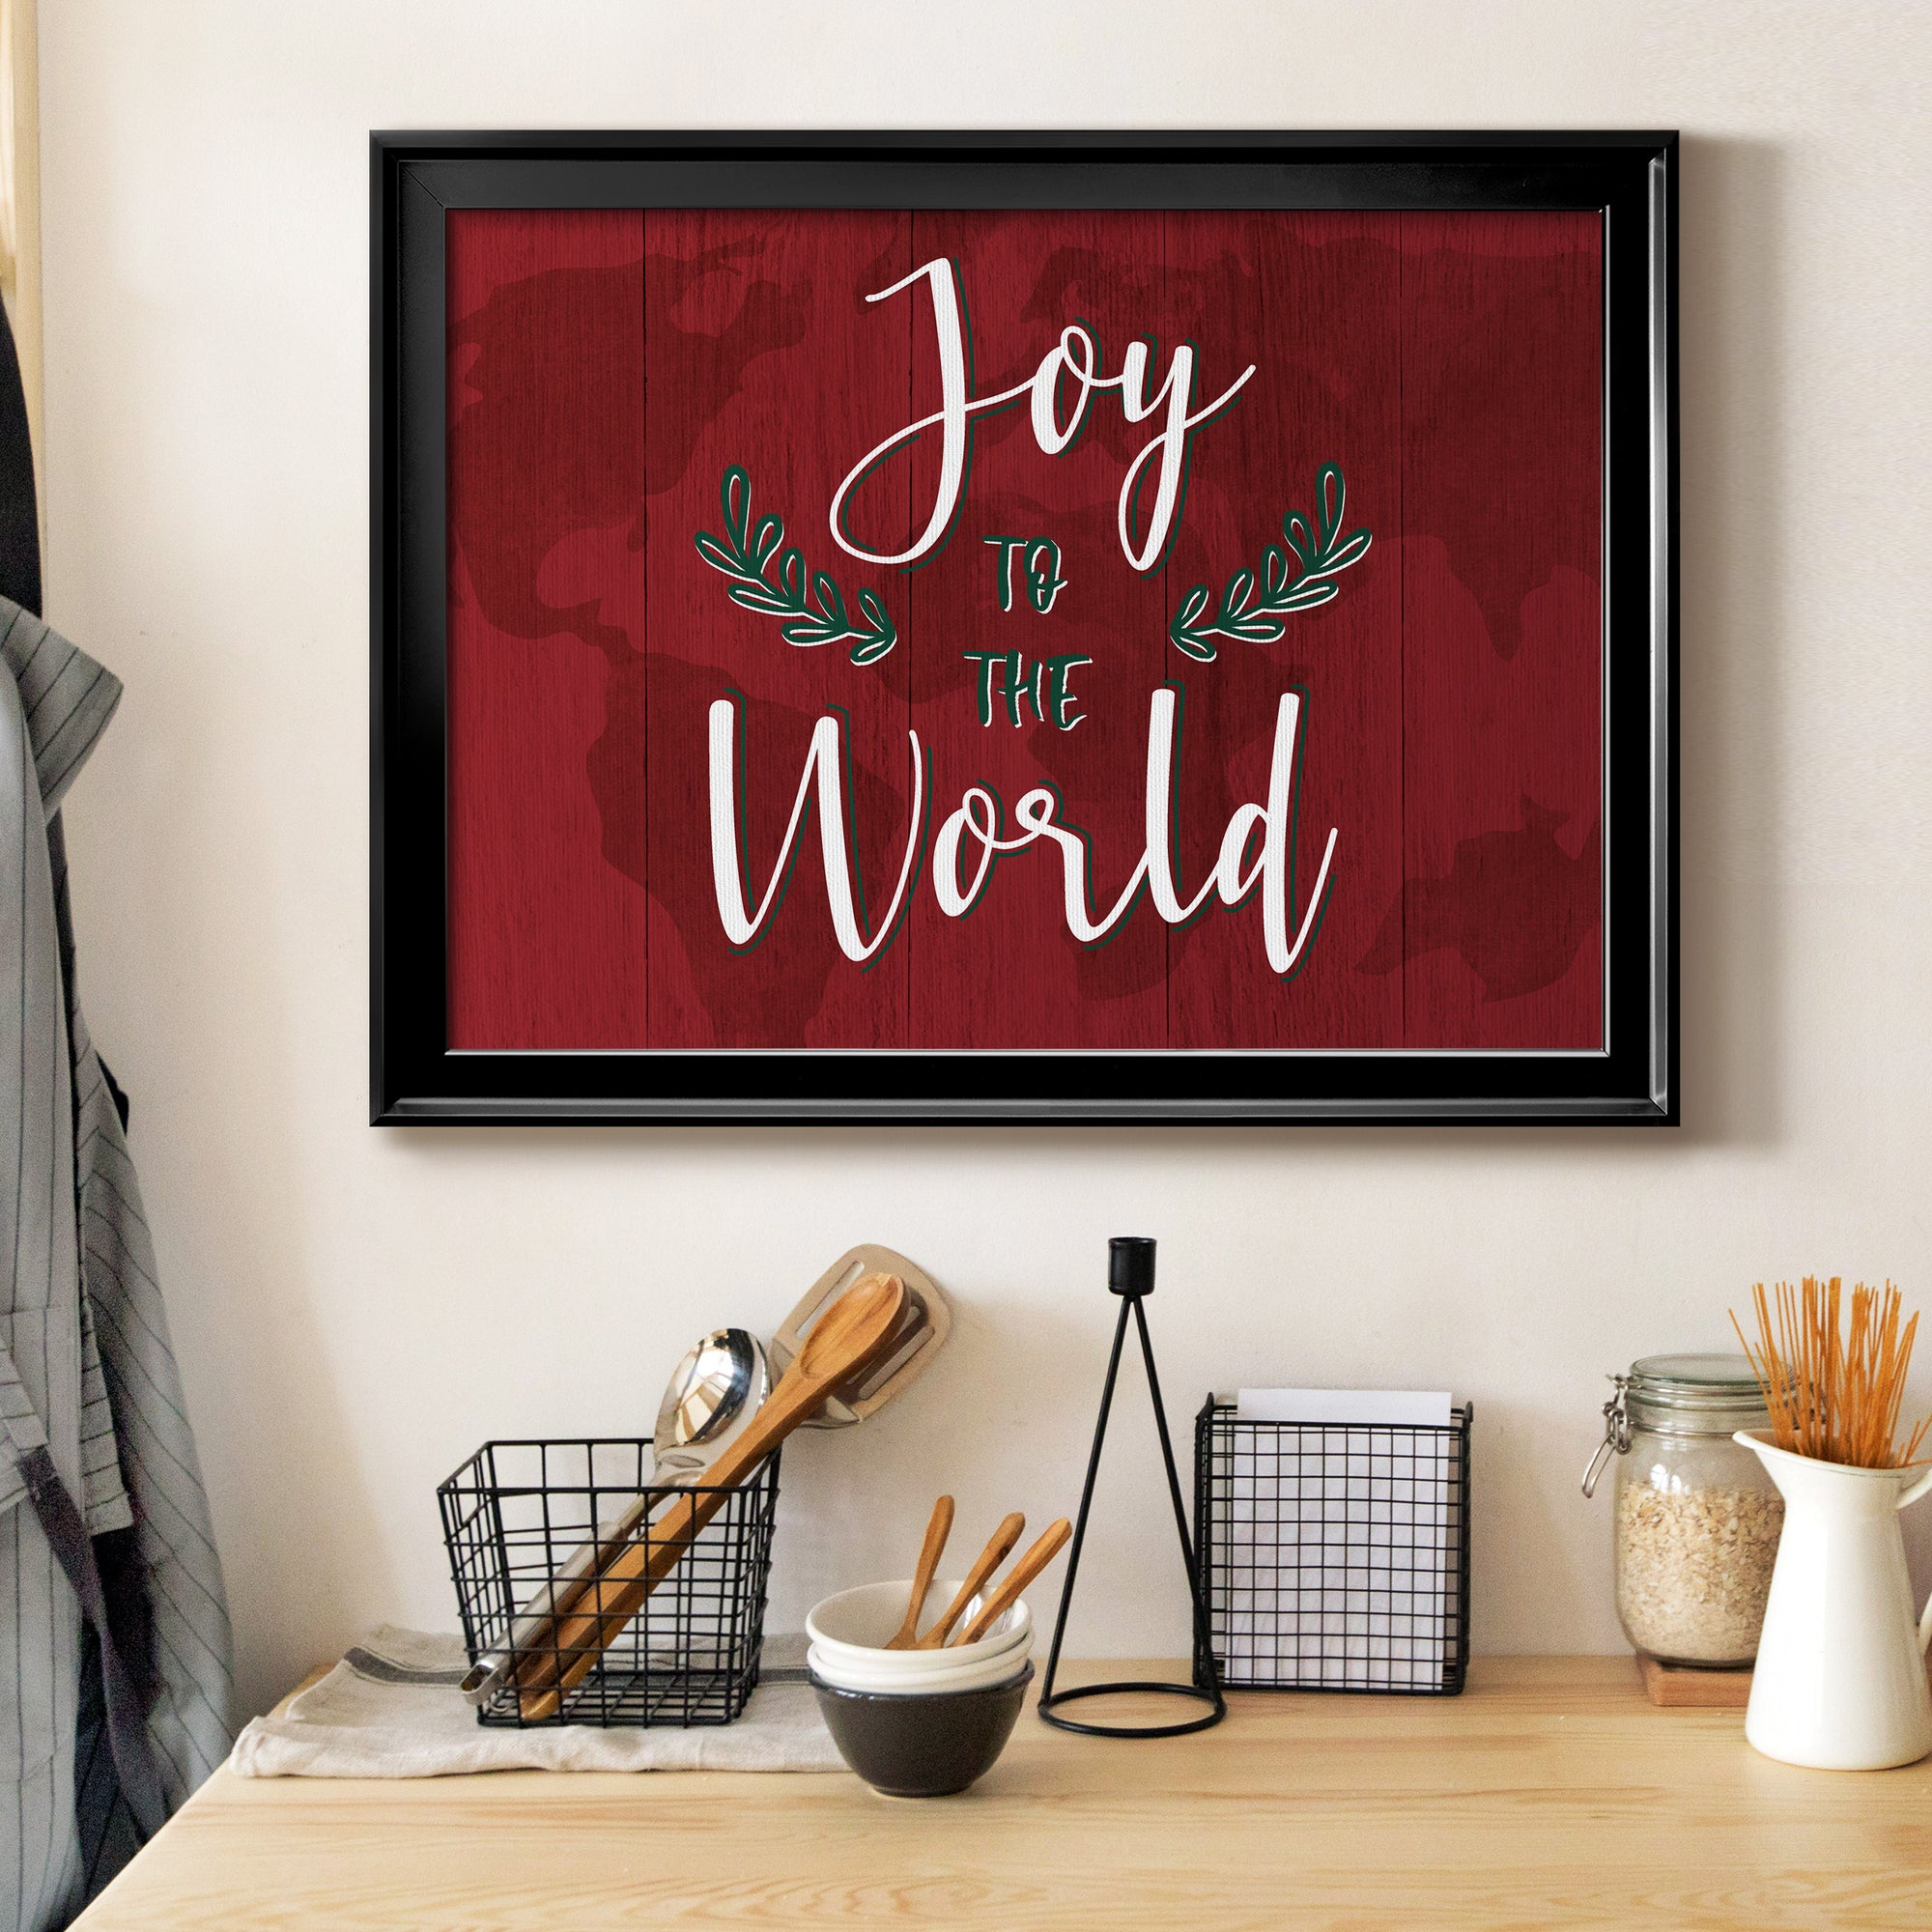 Joy to the World Premium Classic Framed Canvas - Ready to Hang